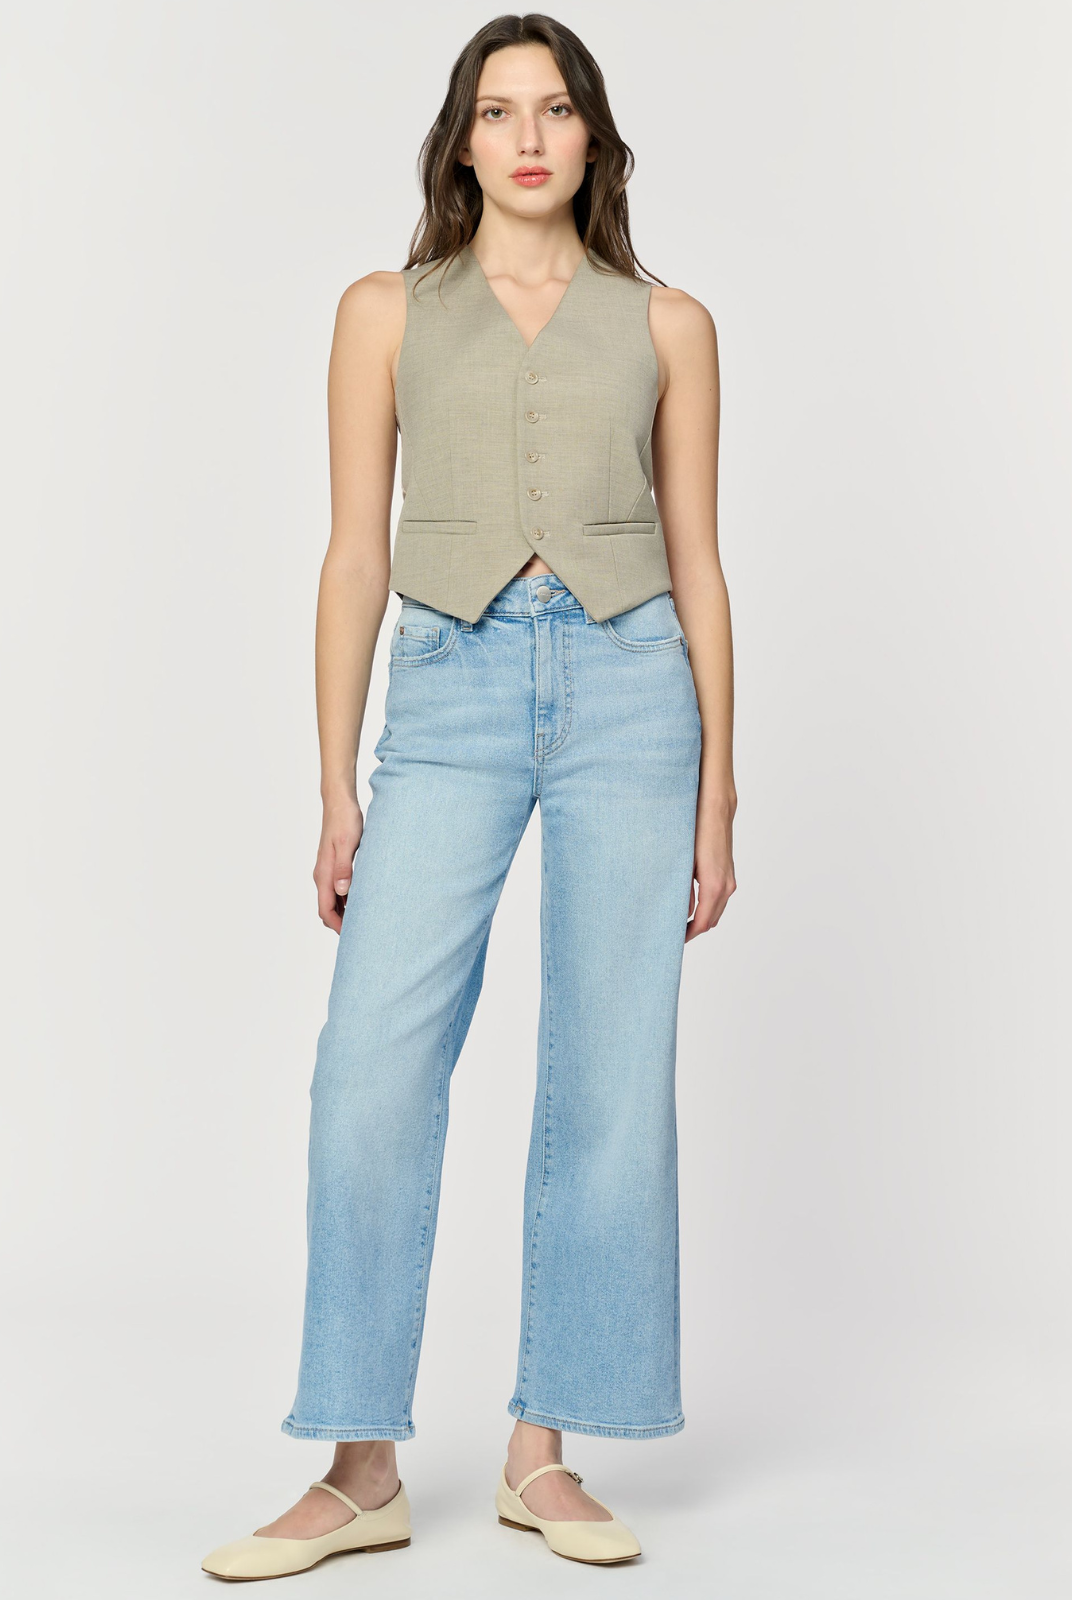 Warp+Weft ICN Wide Leg Jean. <p class="MsoNormal">A nod to trendsetting style in Seoul, this high-rise style is a fresh alternative to your skinnies. Sculpts through the midsection and widens out through the leg to a flattering A-line shape. Modern, timeless and versatile.<u></u><u></u></p> <p class="MsoNormal">&nbsp;</p>